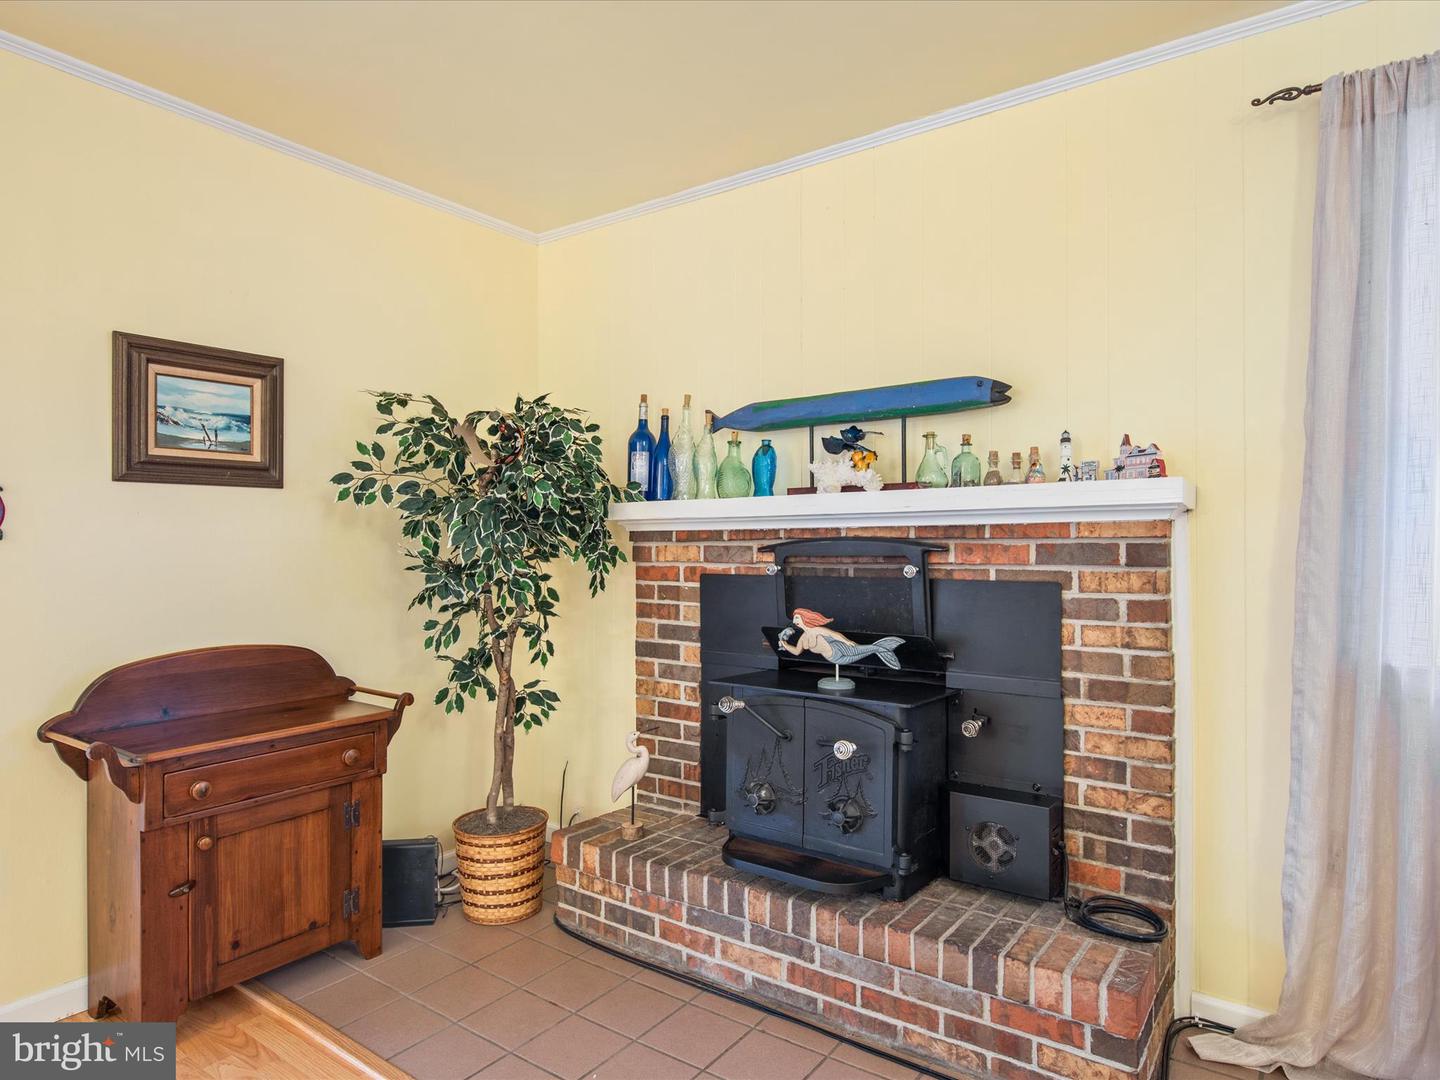 MDWO2019272-802894944914-2024-03-01-08-17-38 20 Southwind Ct | Berlin, MD Real Estate For Sale | MLS# Mdwo2019272  - 1st Choice Properties